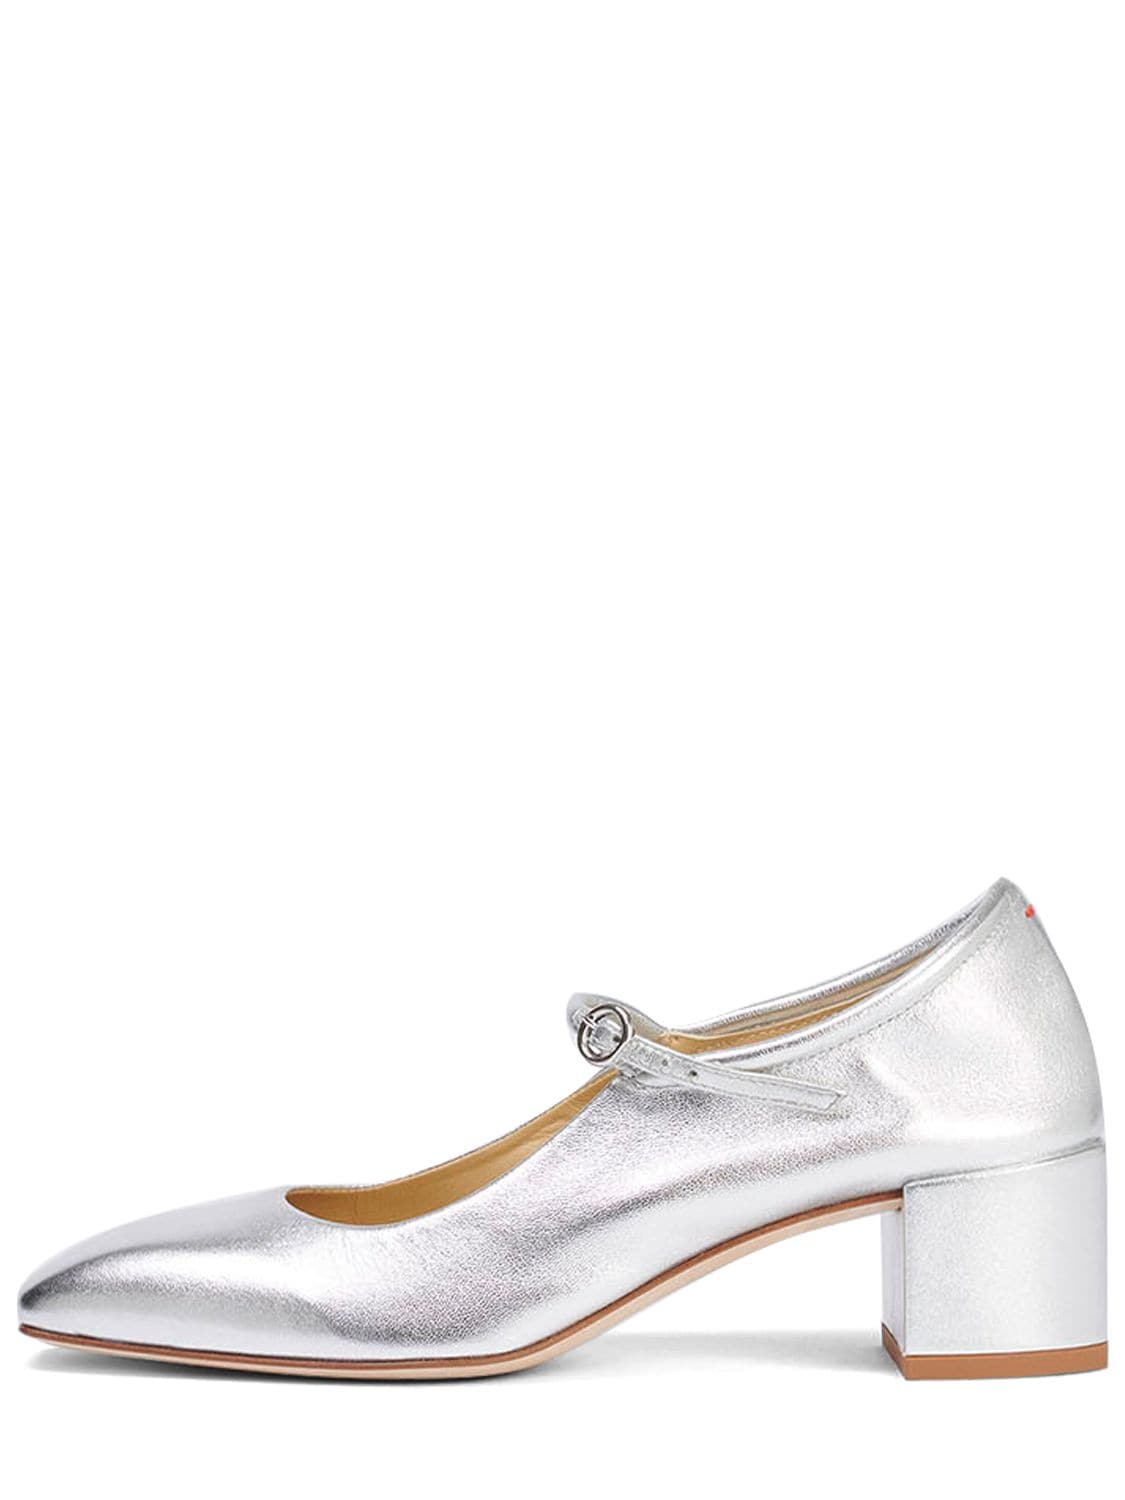 Image of 45mm Aline Laminated Leather Pumps